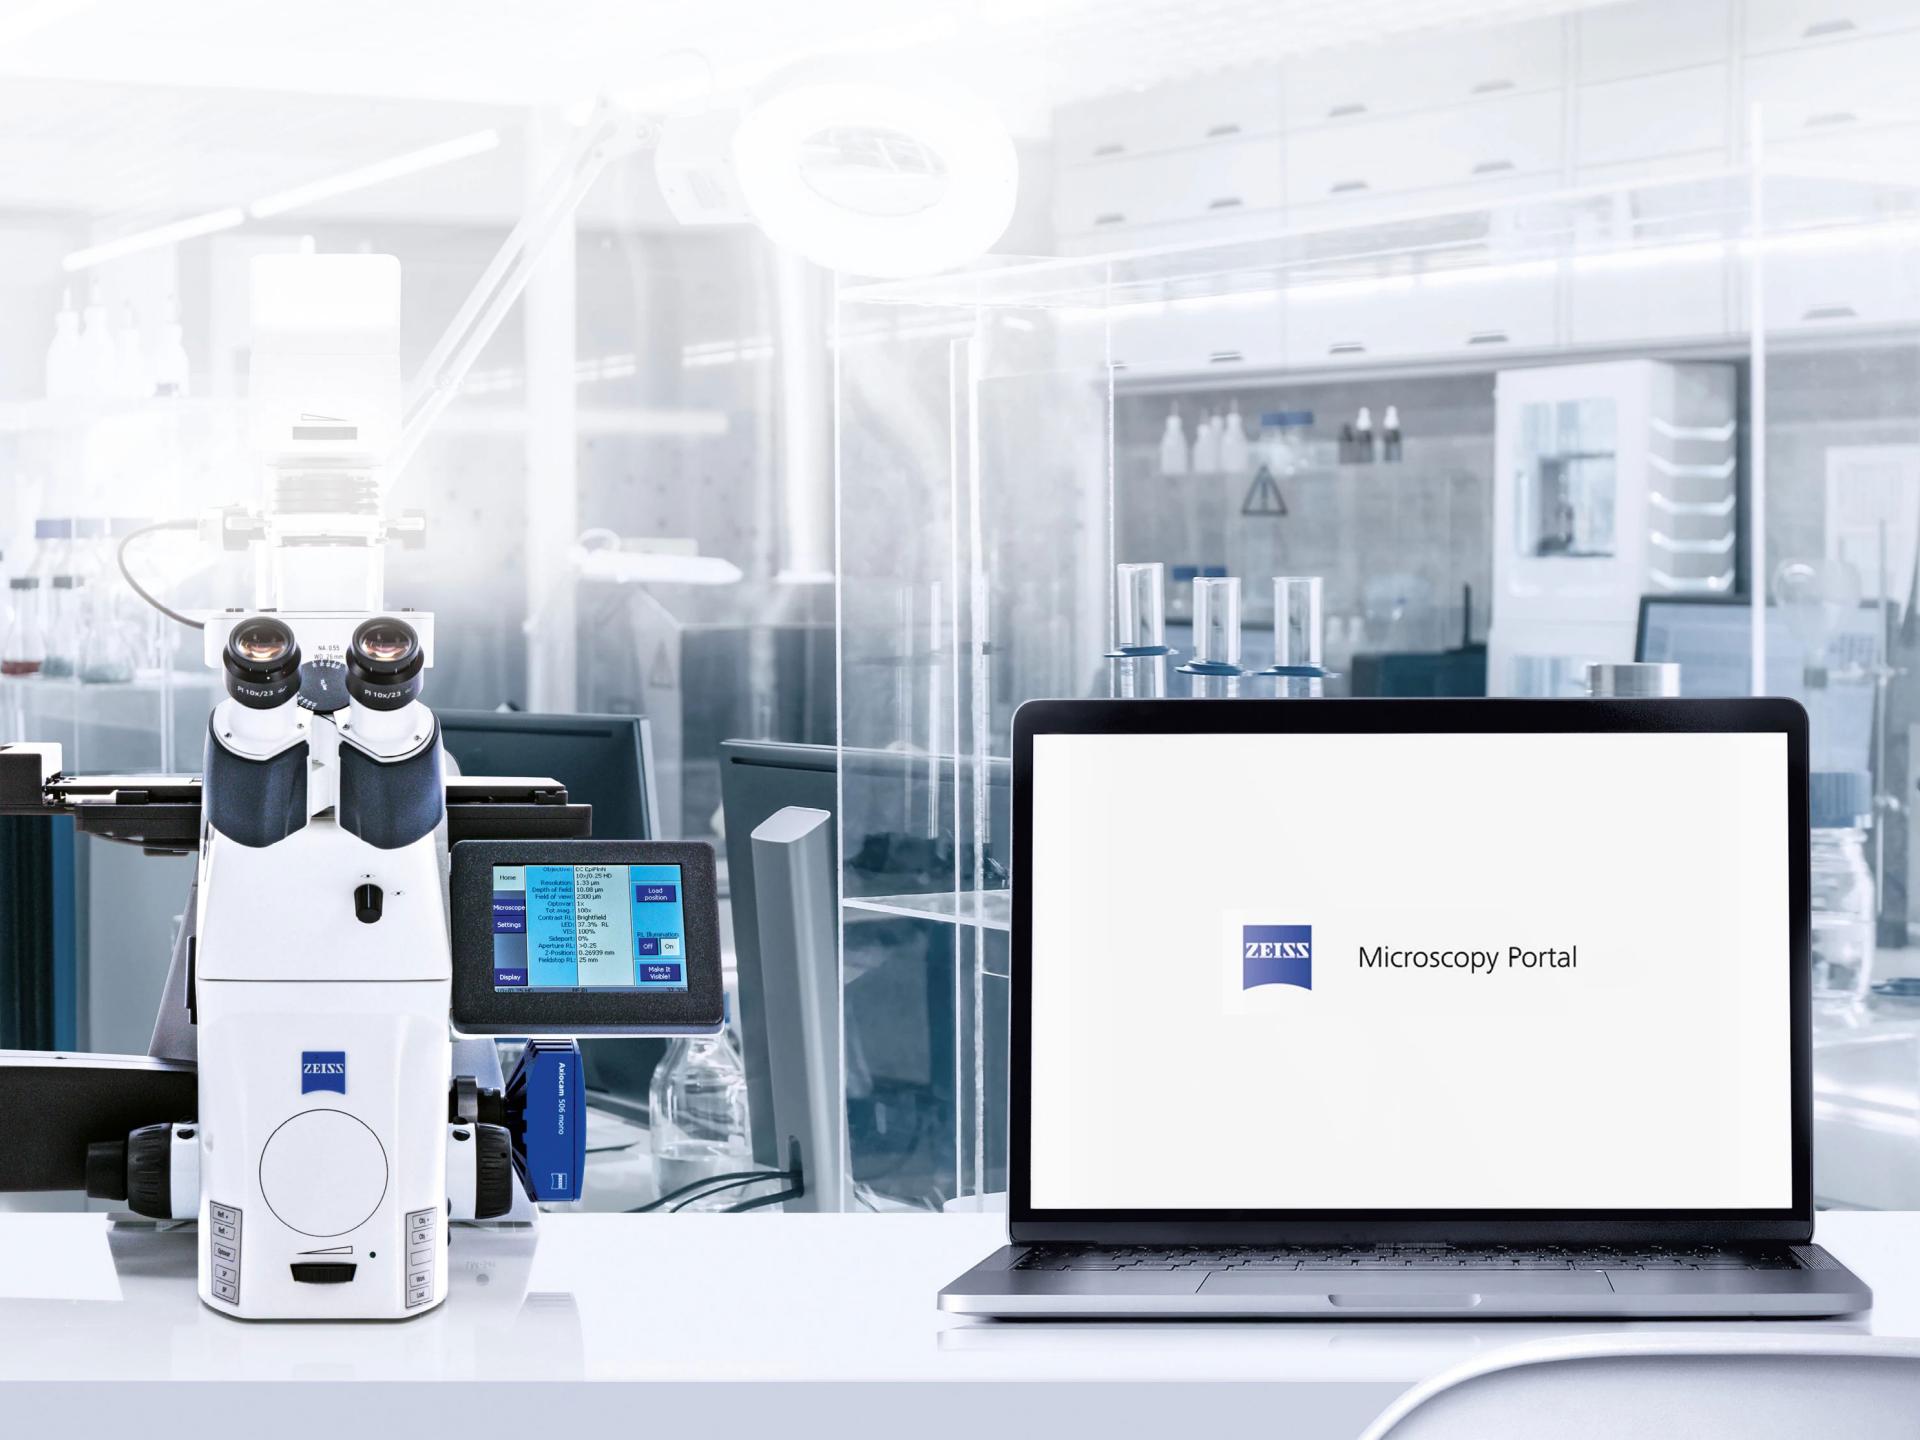 ZEISS Microscopy Portal - Your One-stop Shop for Service and Support